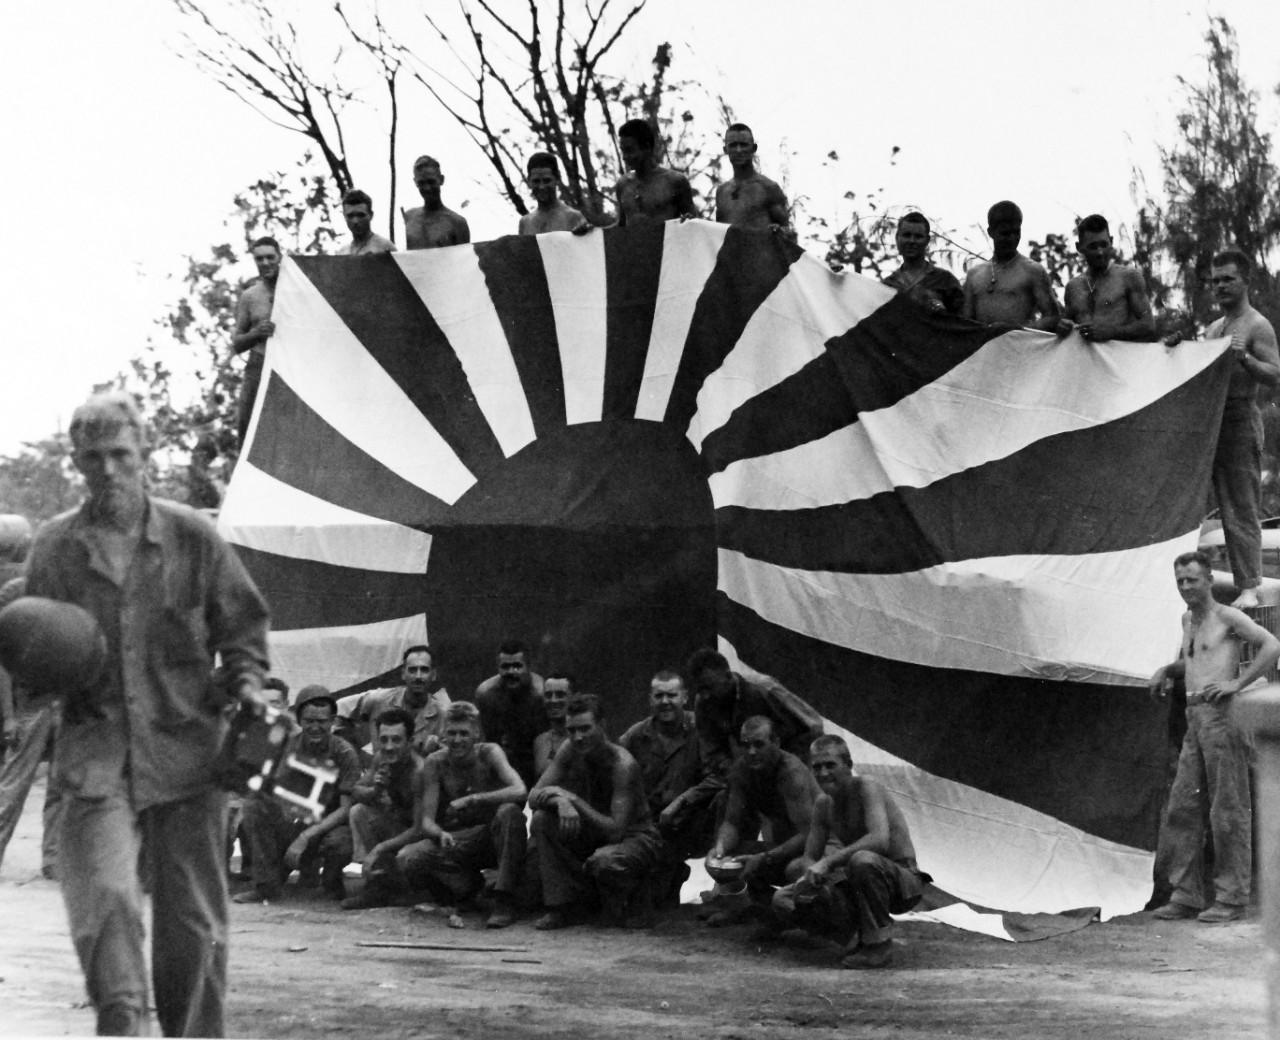 80-G-287222:   Invasion of Saipan, June-July 1944.  Large Japanese flag captured by U.S. Forces on Saipan, July 9th.  Photographed by USS Indianapolis (CA-35) photographer.   Official U.S. Navy Photograph, now in the collections of the National Archives.  (2017/03/21).  